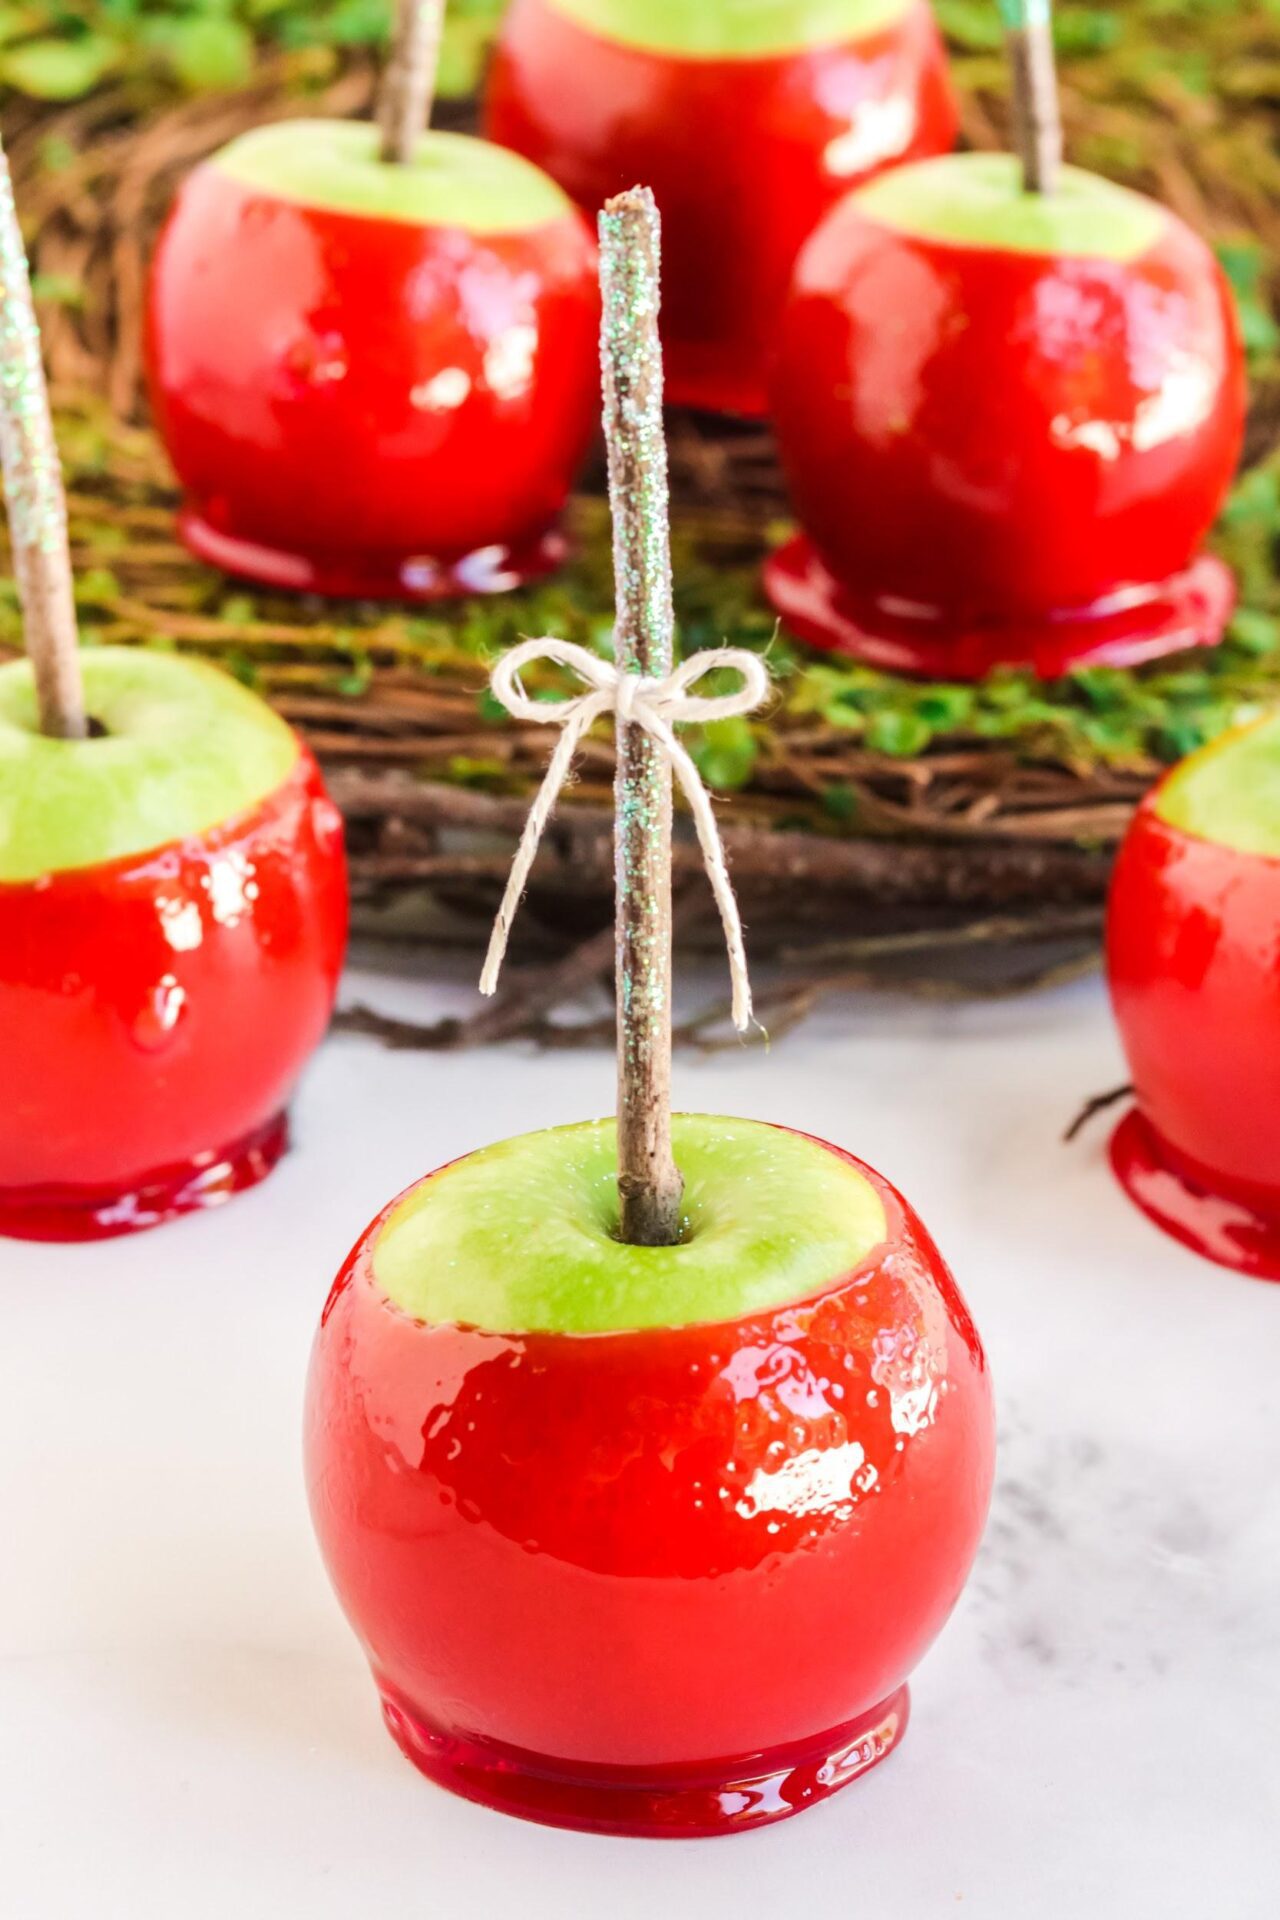 Add a pop of color this fall with this super simple Homemade candy apple recipes, otherwise known as a toffee apple outside the United States.